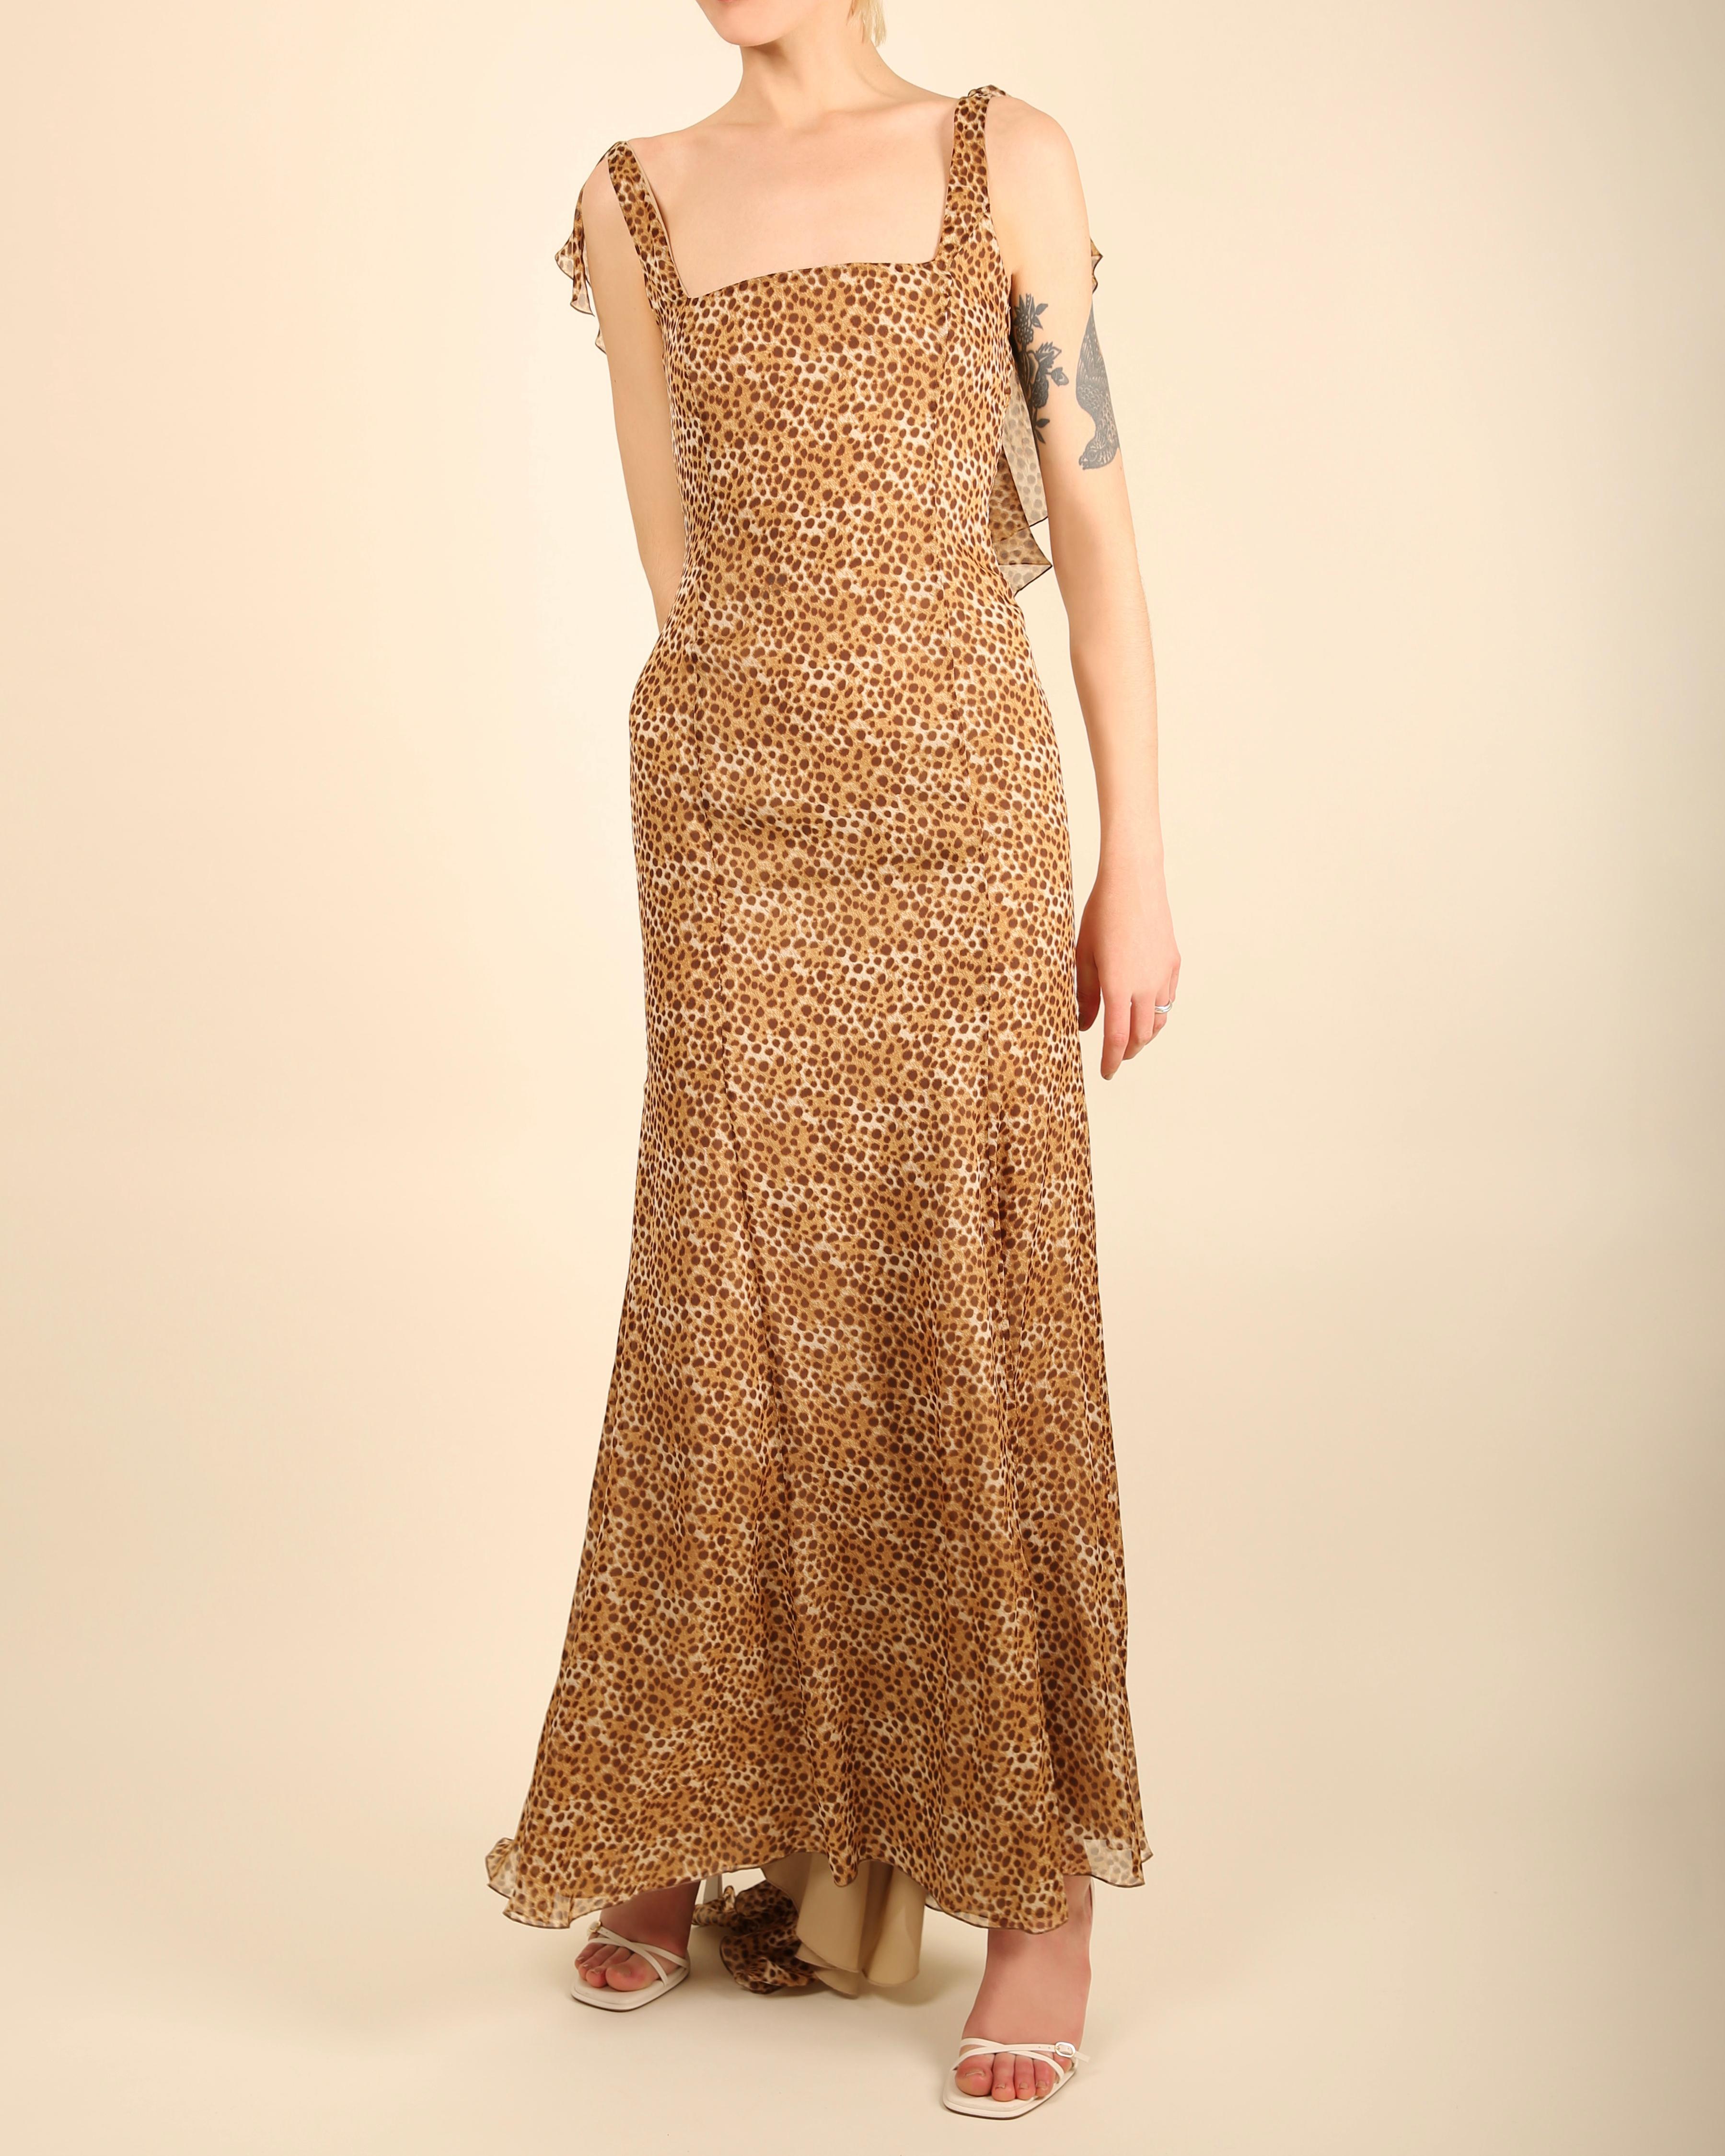 Valentino circa 1990 vintage sleeveless brown leopard print backless dress gown 4